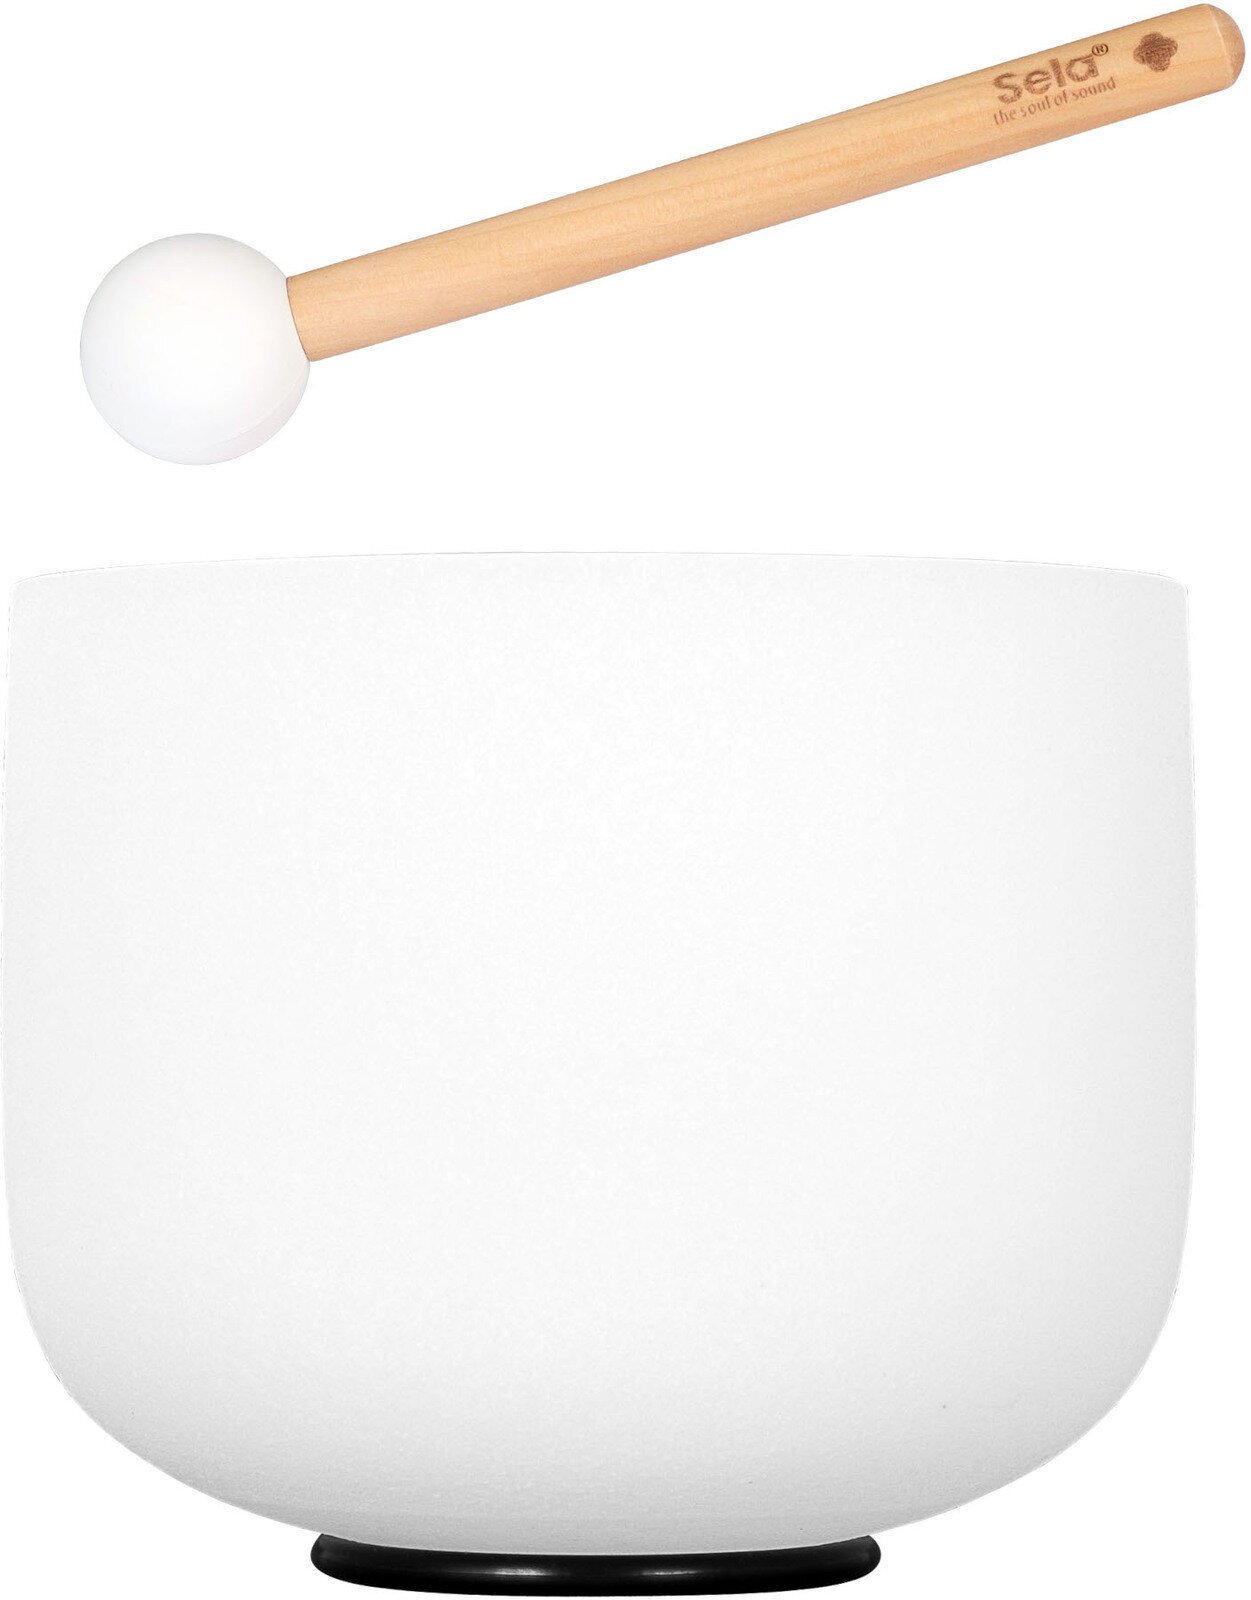 Percussions musicothérapeutiques Sela 10" Crystal Singing Bowl Frosted 440 Hz E incl. 1 Wood Mallet